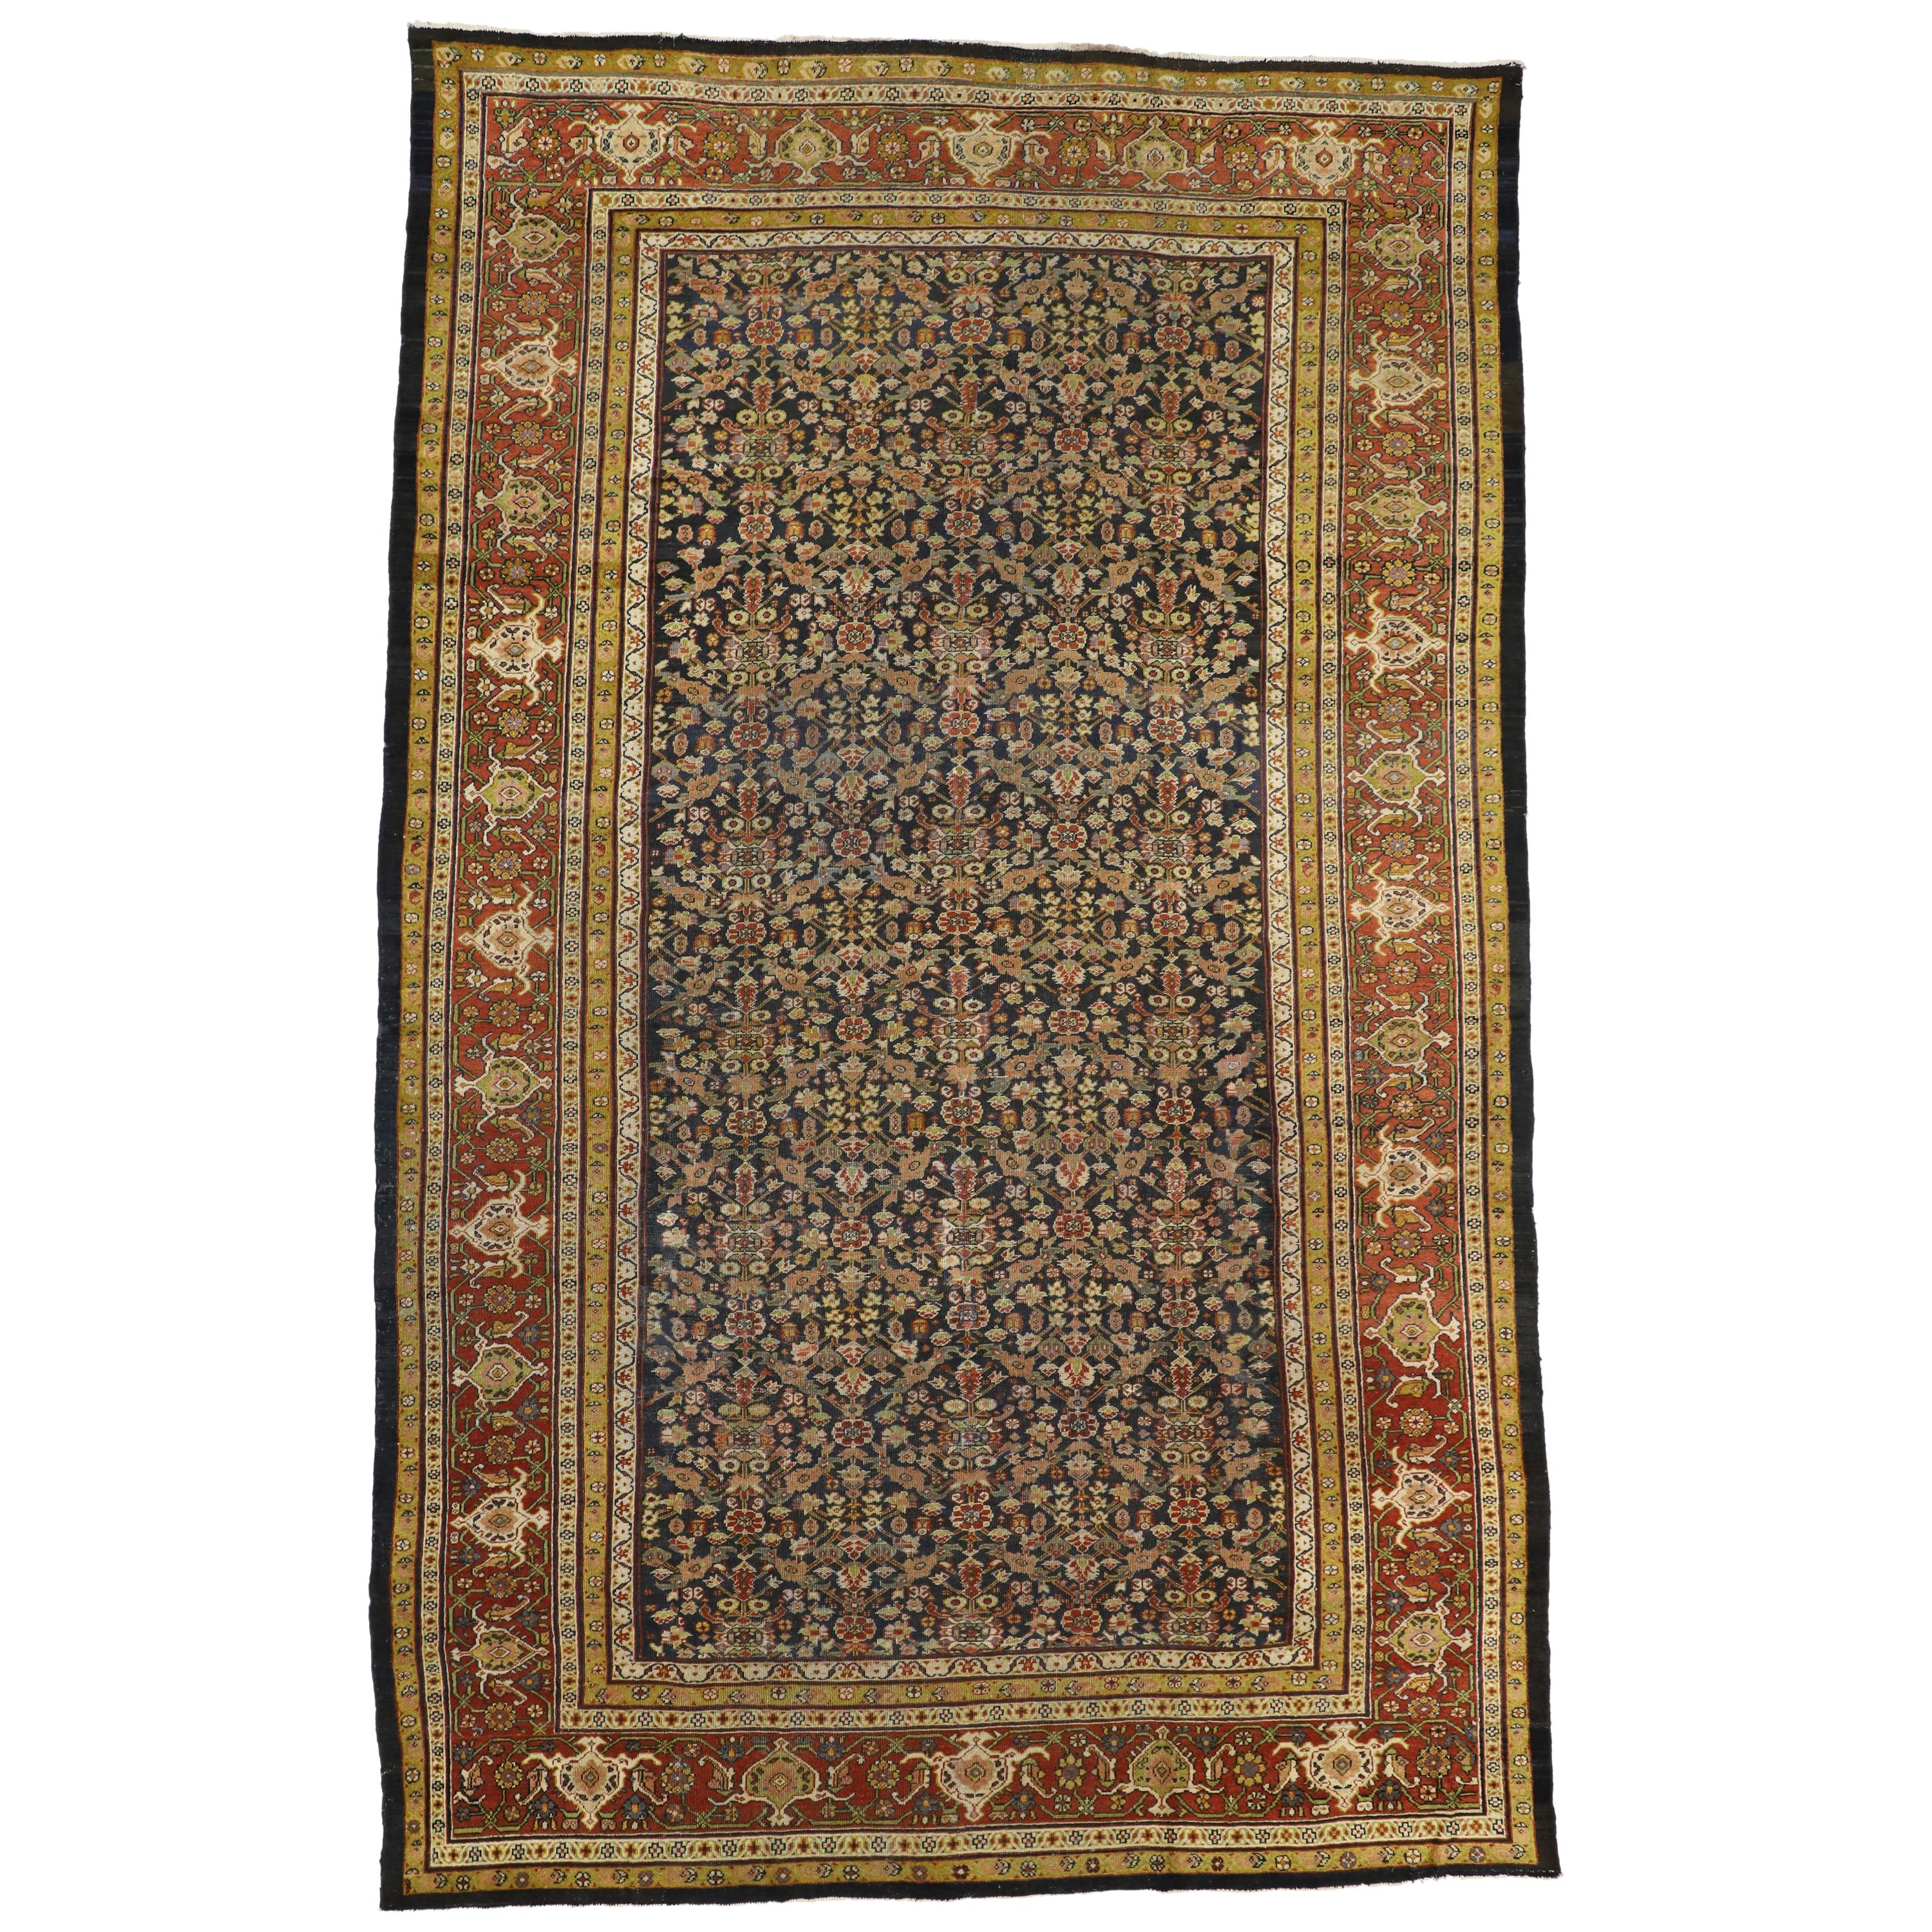 Distressed Antique Persian Sultanabad Palace Rug with Industrial Artisan Style